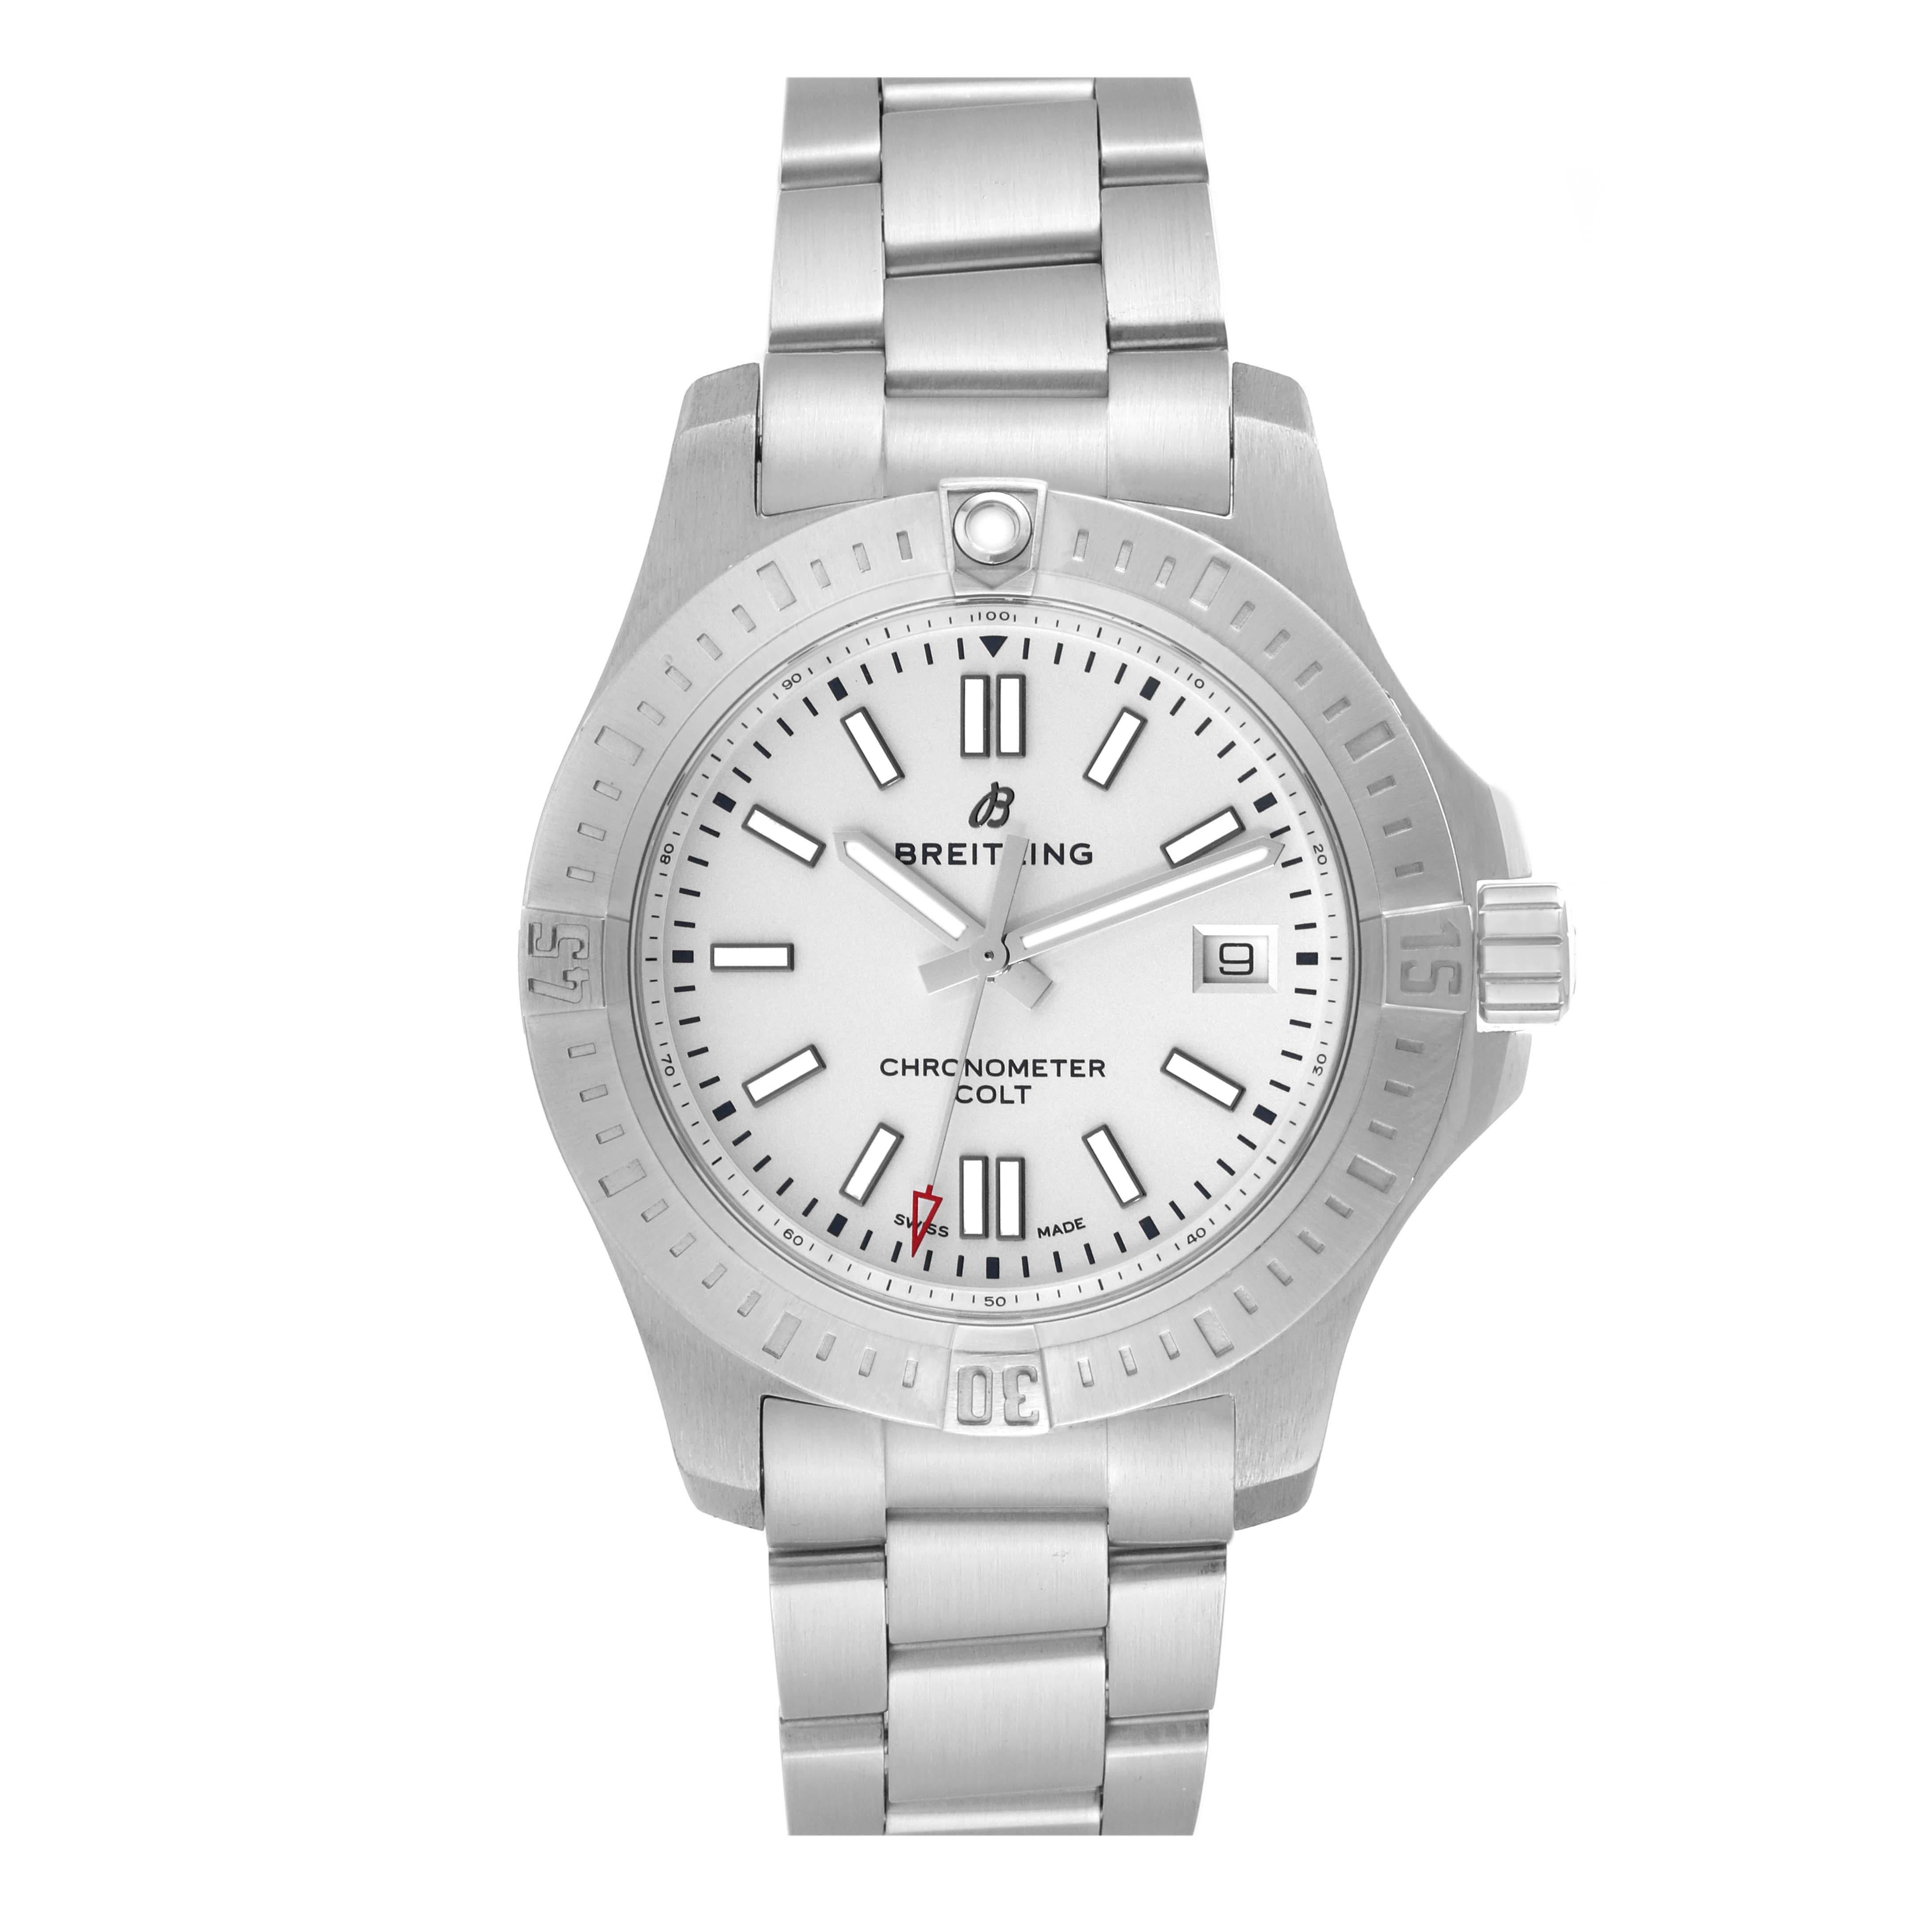 Breitling Colt White Dial Automatic Steel Mens Watch A17313 Box Card. Automatic self-winding chronometer movement. Stainless steel case 41.0 mm in diameter. Breitling logo on a crown. Case thickness: 10.70 mm. Stainless steel unidirectional rotating